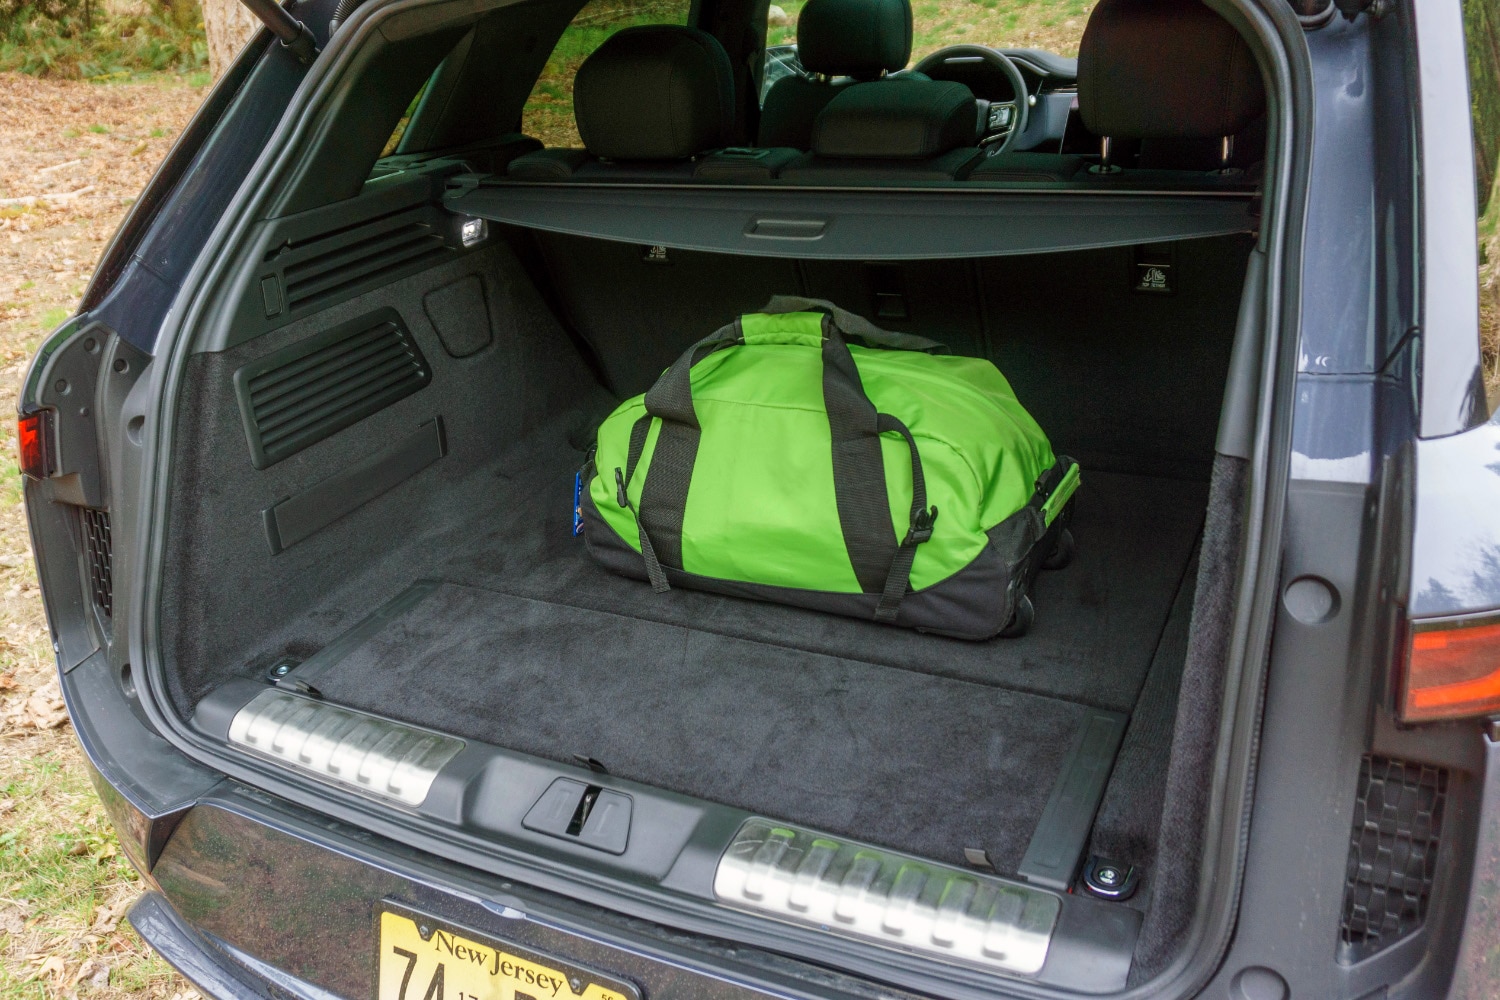 2023 Land Rover Range Rover Sport PHEV rear cargo area with green duffel bag for perspective.